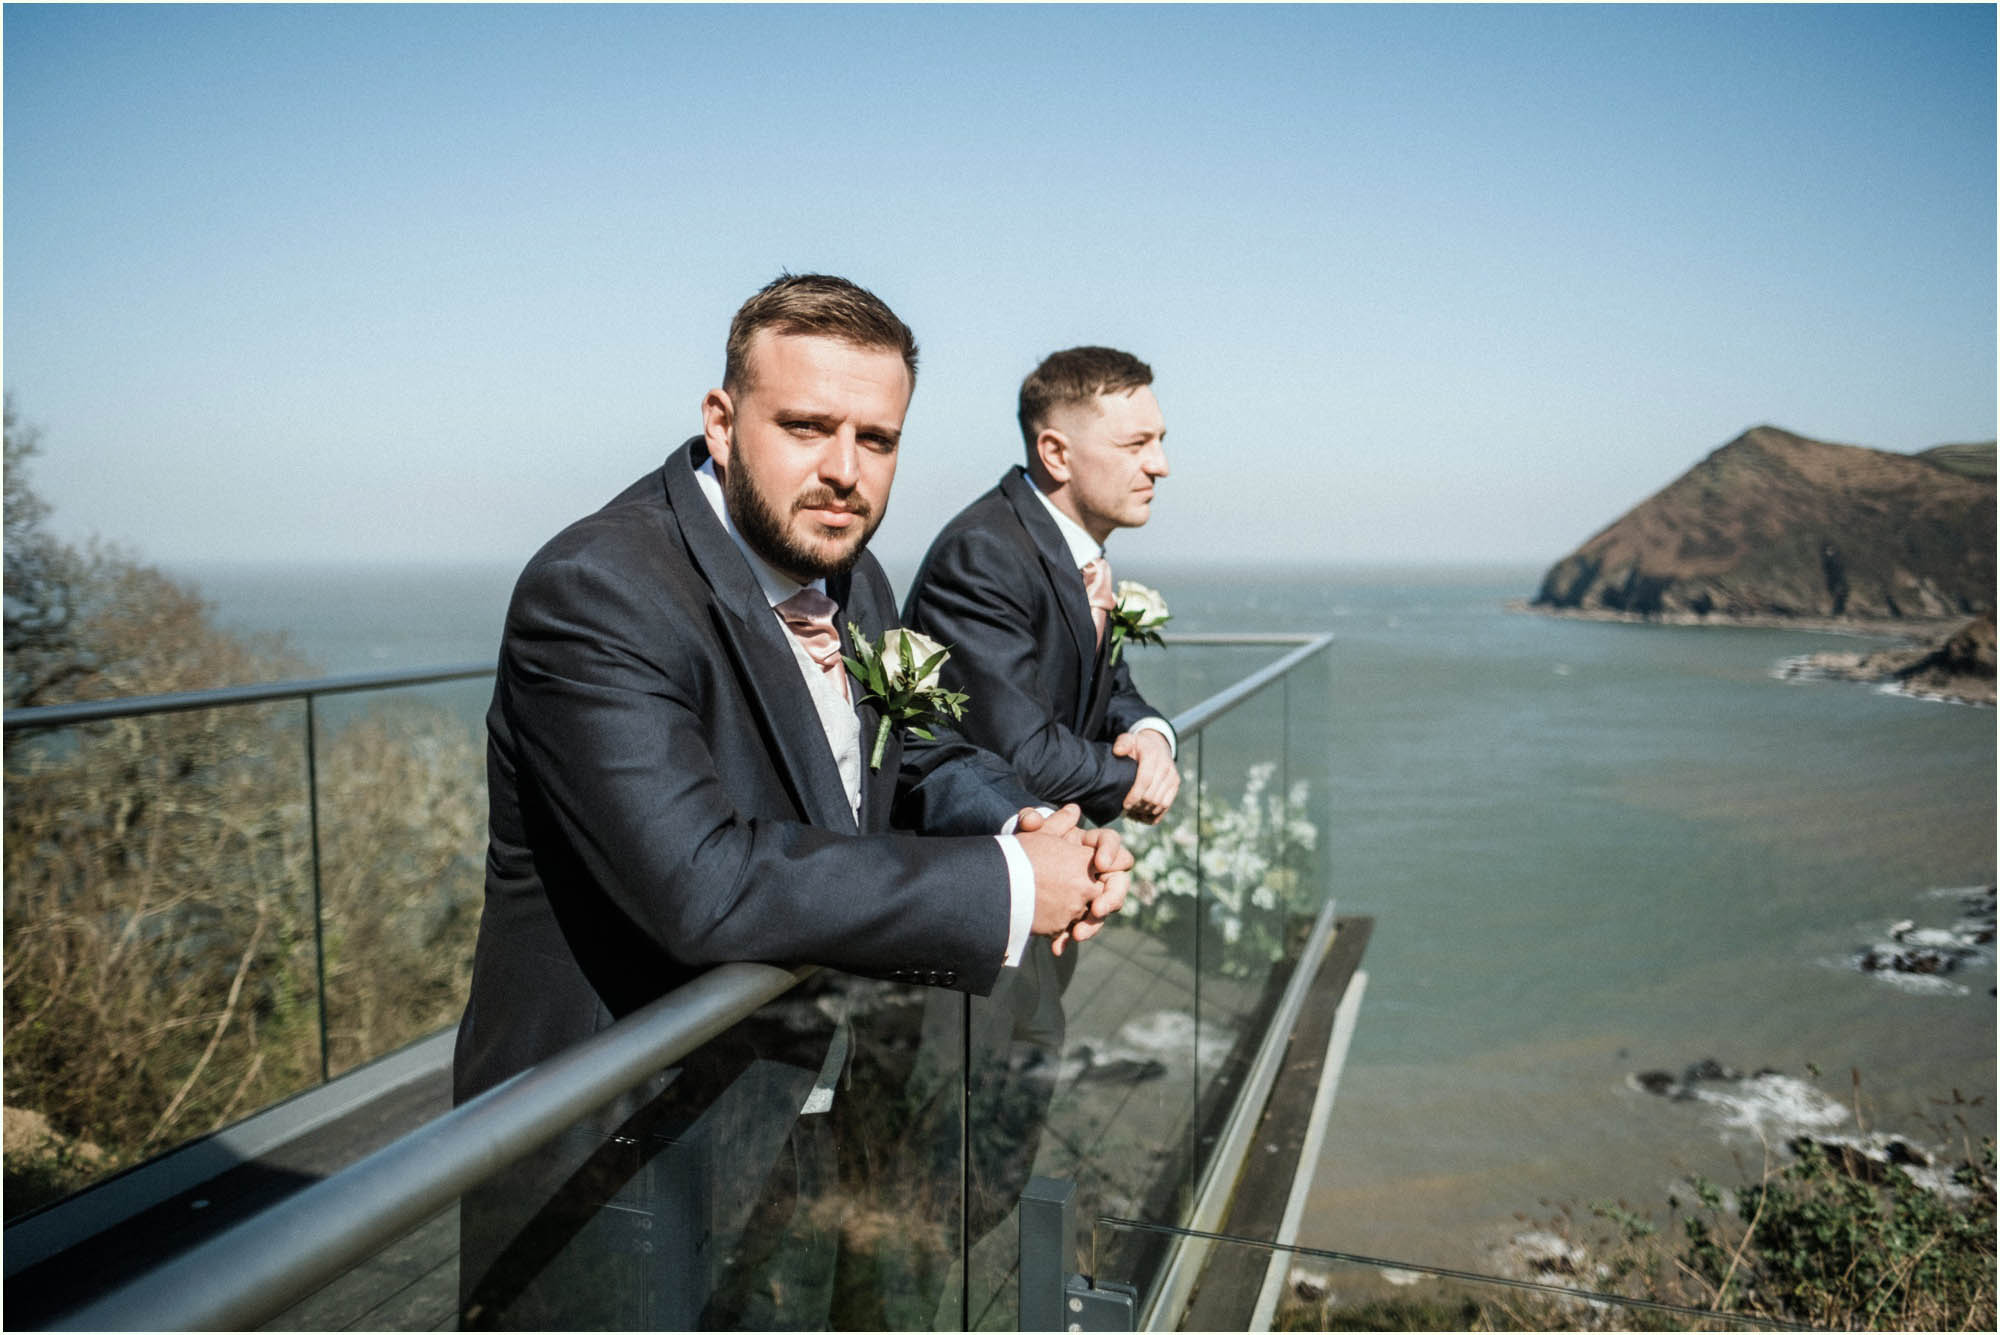 Adam and Abbie's Sandy Cove wedding in Devon with an outdoor ceremony and elegant summer styling in ivory and blush